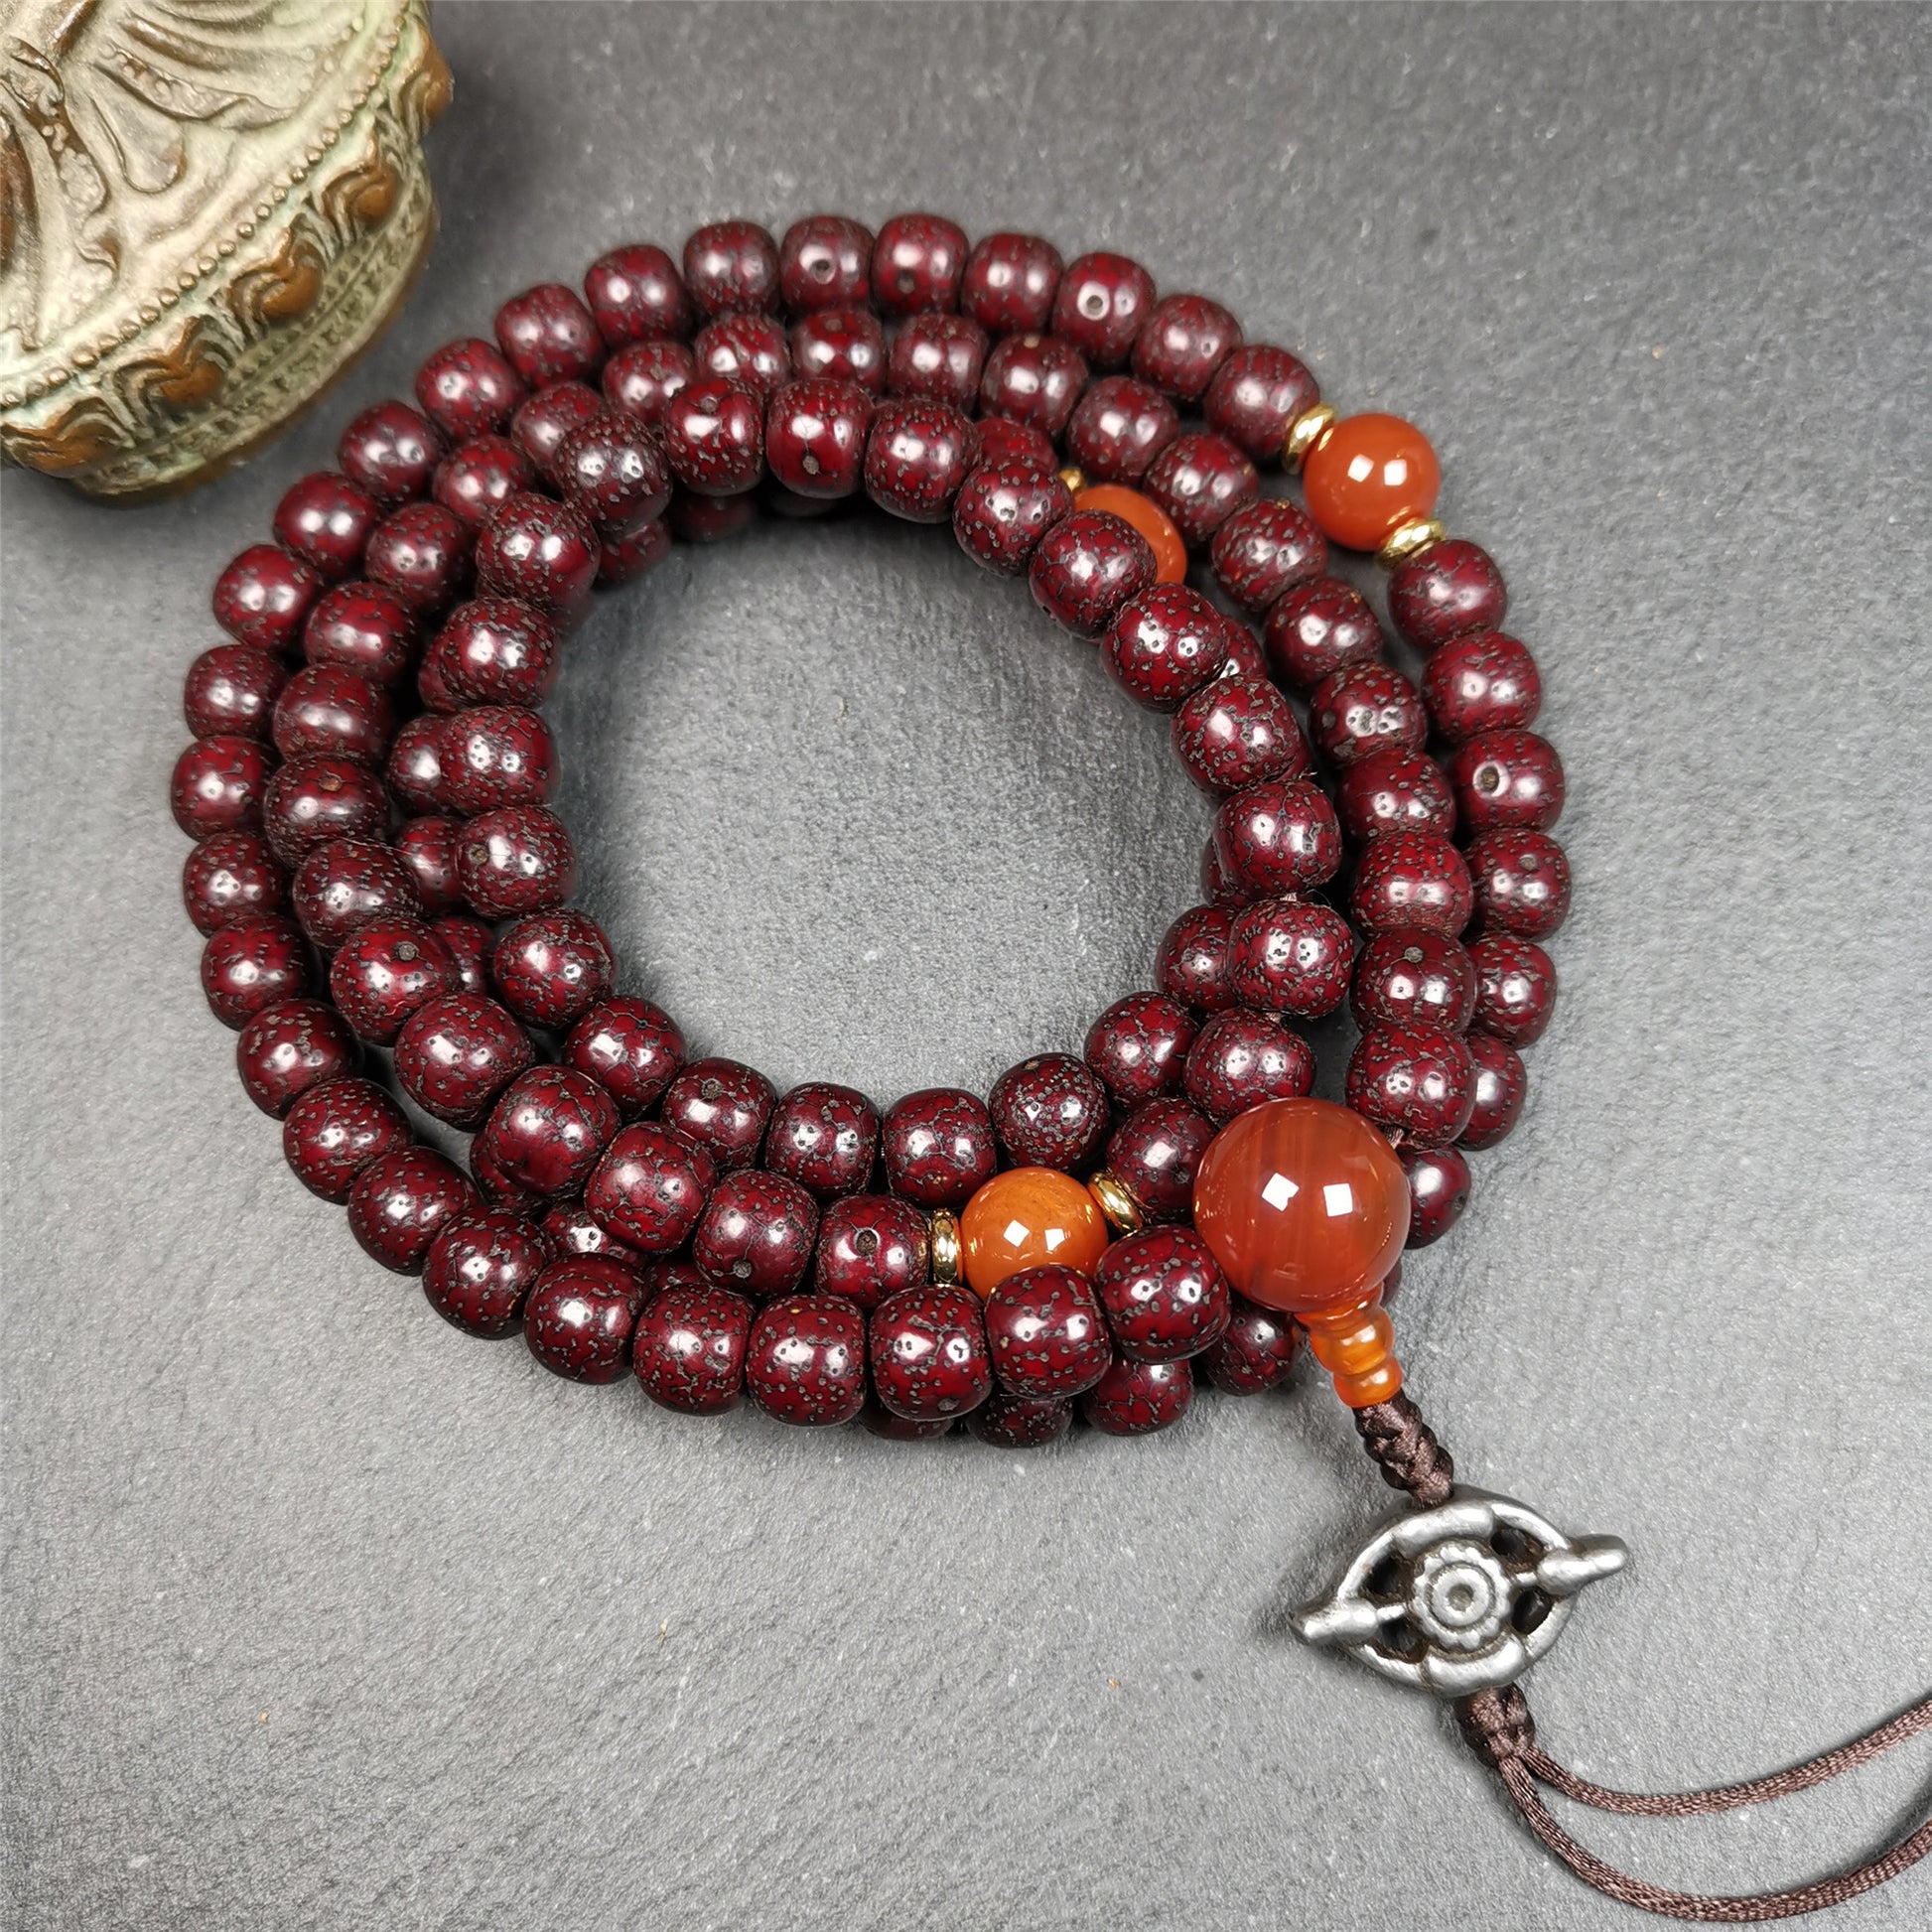 This mala is made by Tibetan craftsmen and come from Hepo Town, Baiyu County,Tibet, the birthplace of the famous Tibetan handicrafts. It's composed of 108 pcs 9mm lotus seed beads,with agate spacer beads,and agate bead counters,diameter 0.35 inch,circumference 35 inches.